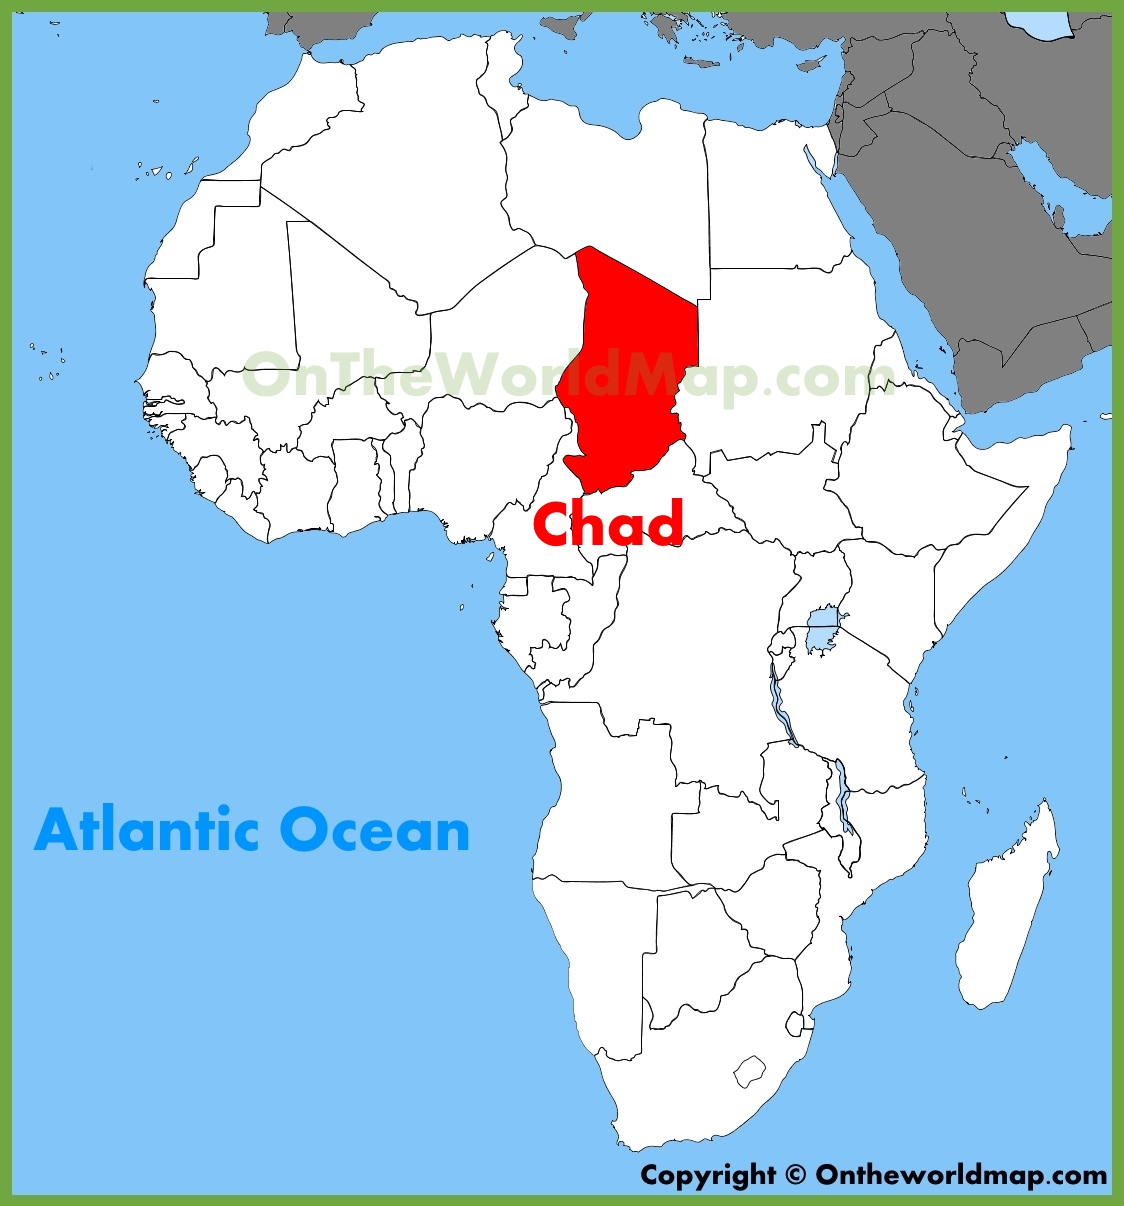 chad-location-on-the-africa-map.jpg